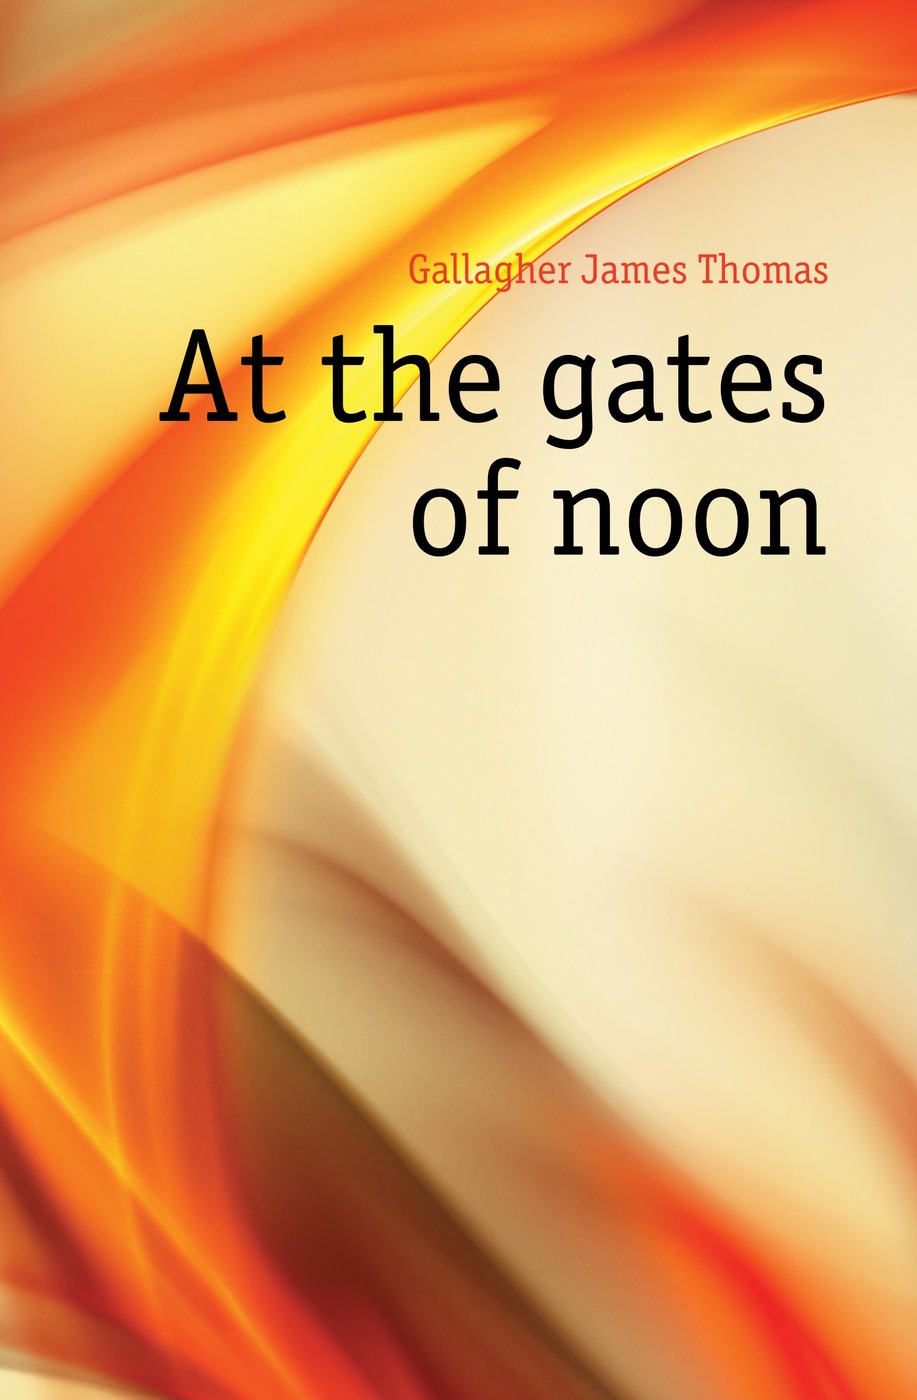 At the gates of noon